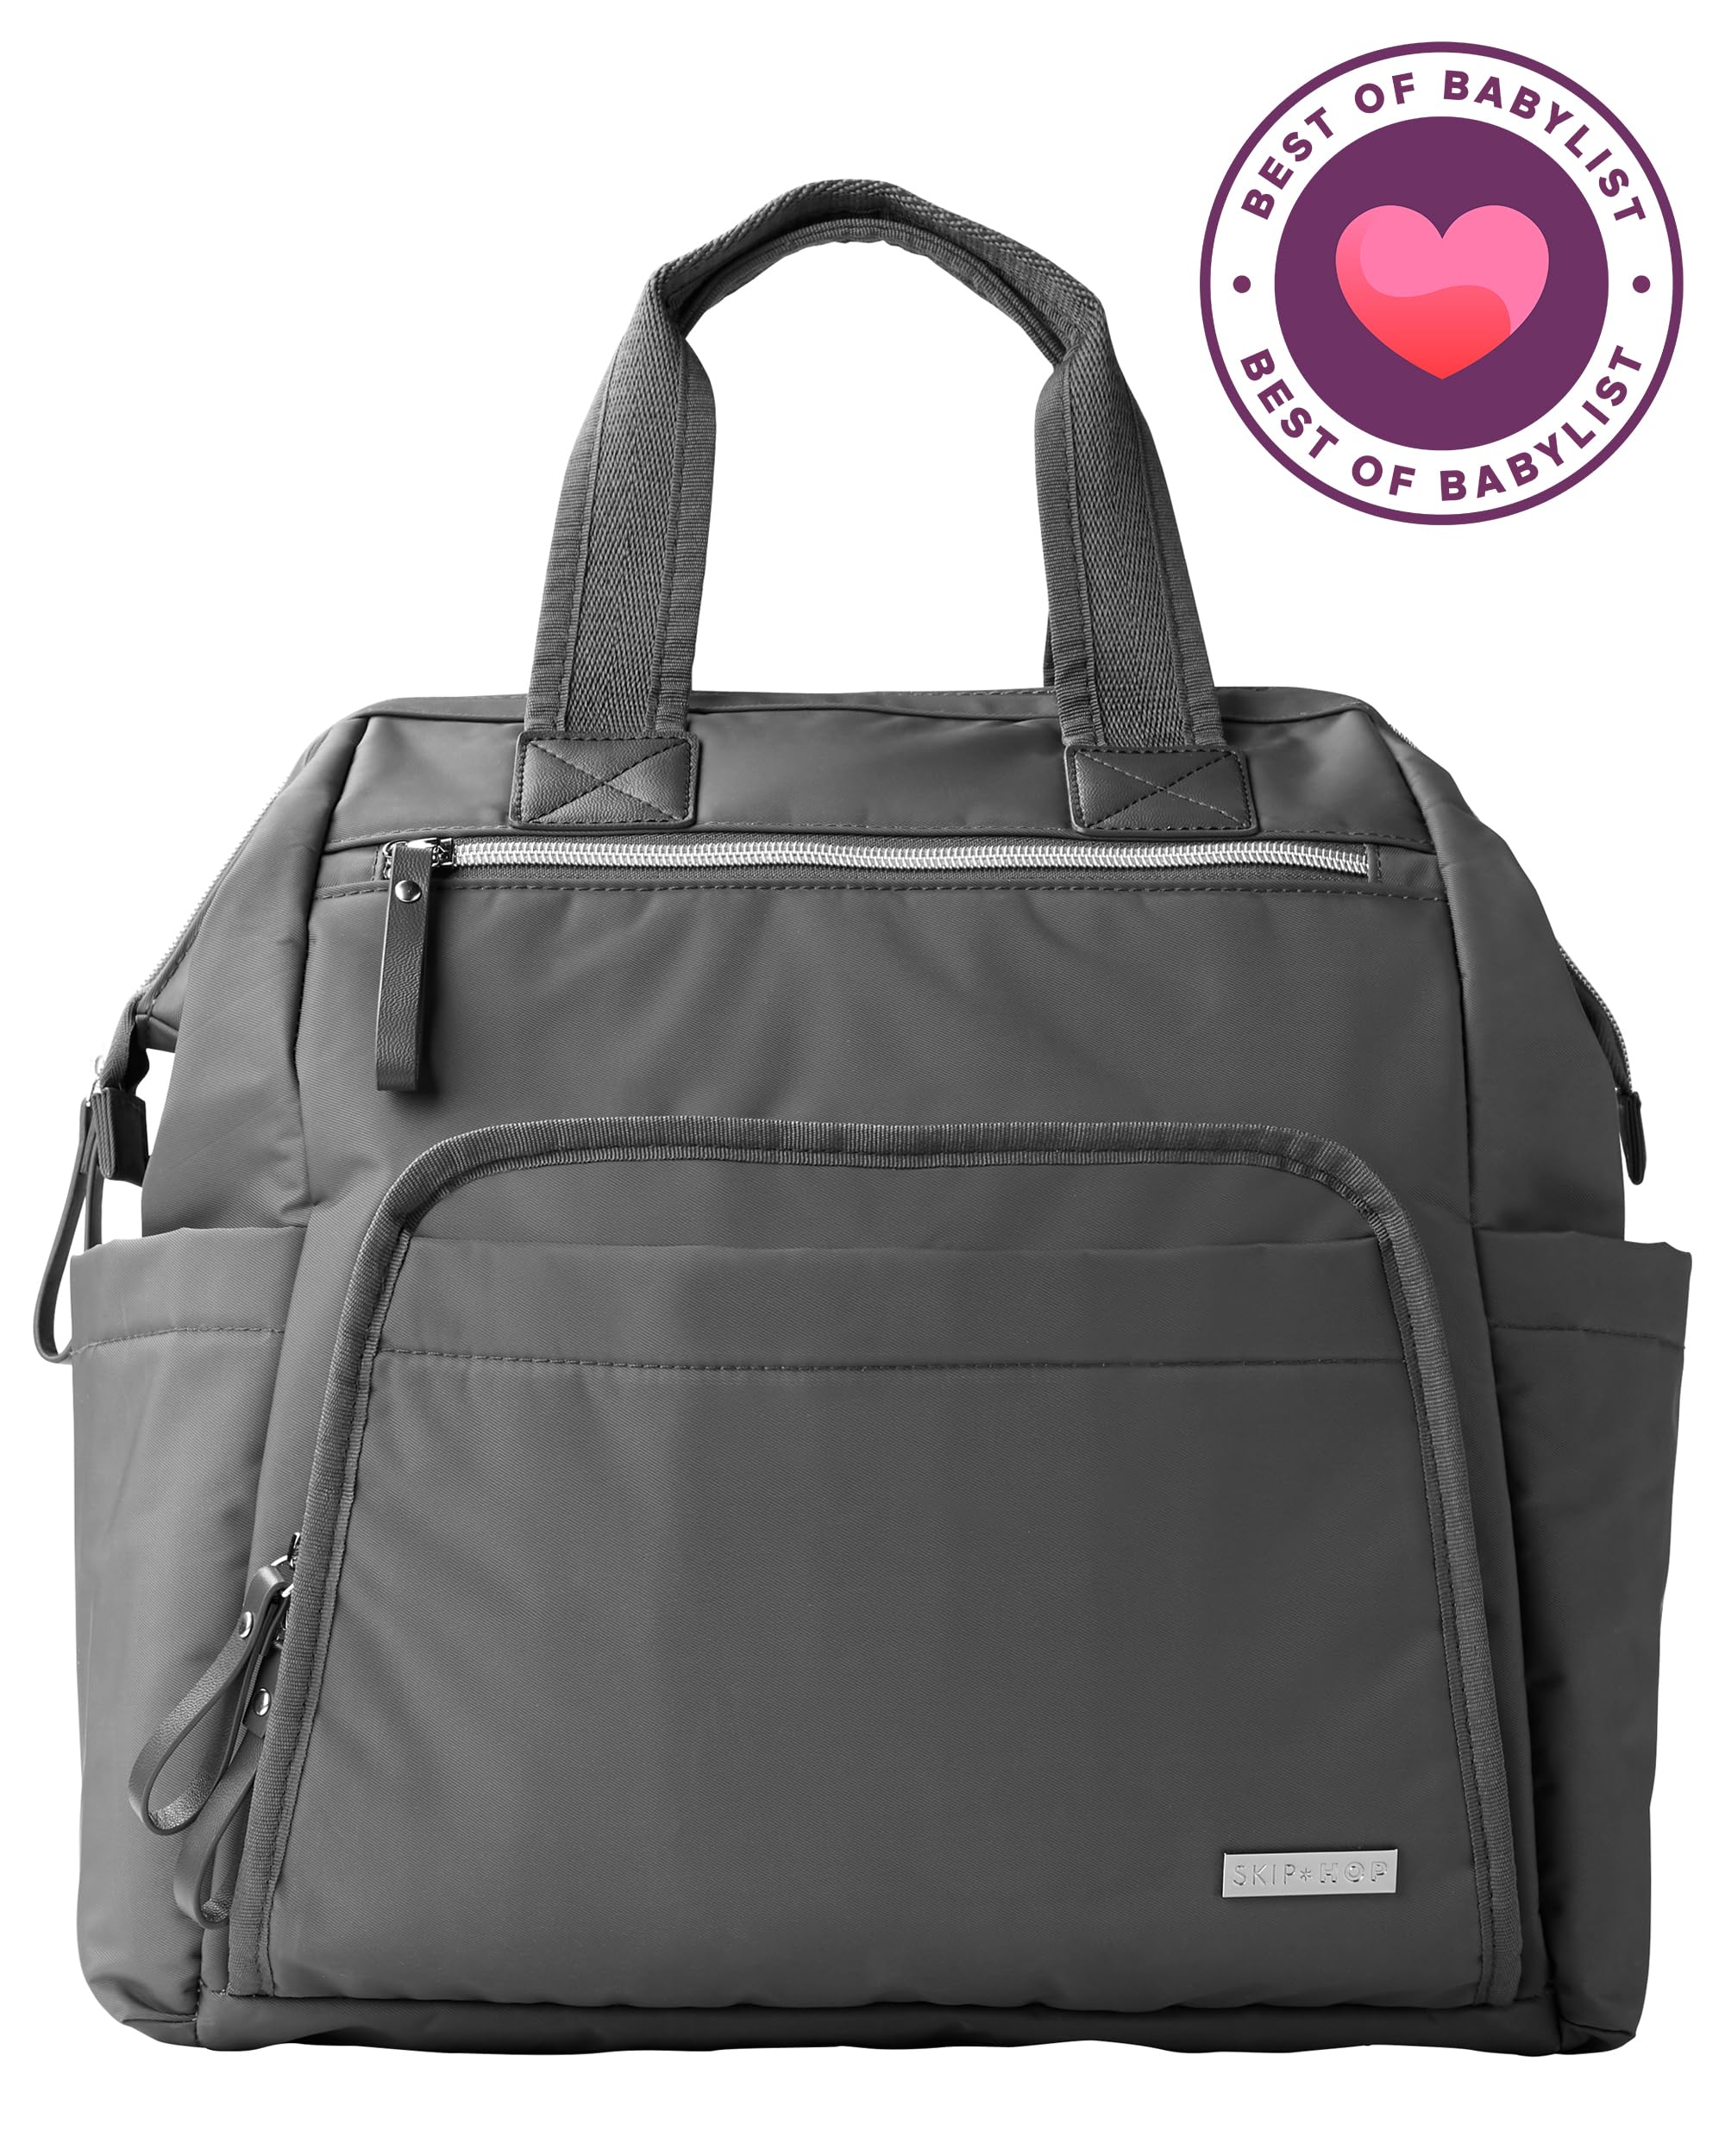 Skip Hop Diaper Bag Backpack: Mainframe Large Capacity Wide Open Structure with Changing Pad & Stroller Attachement, Charcoal